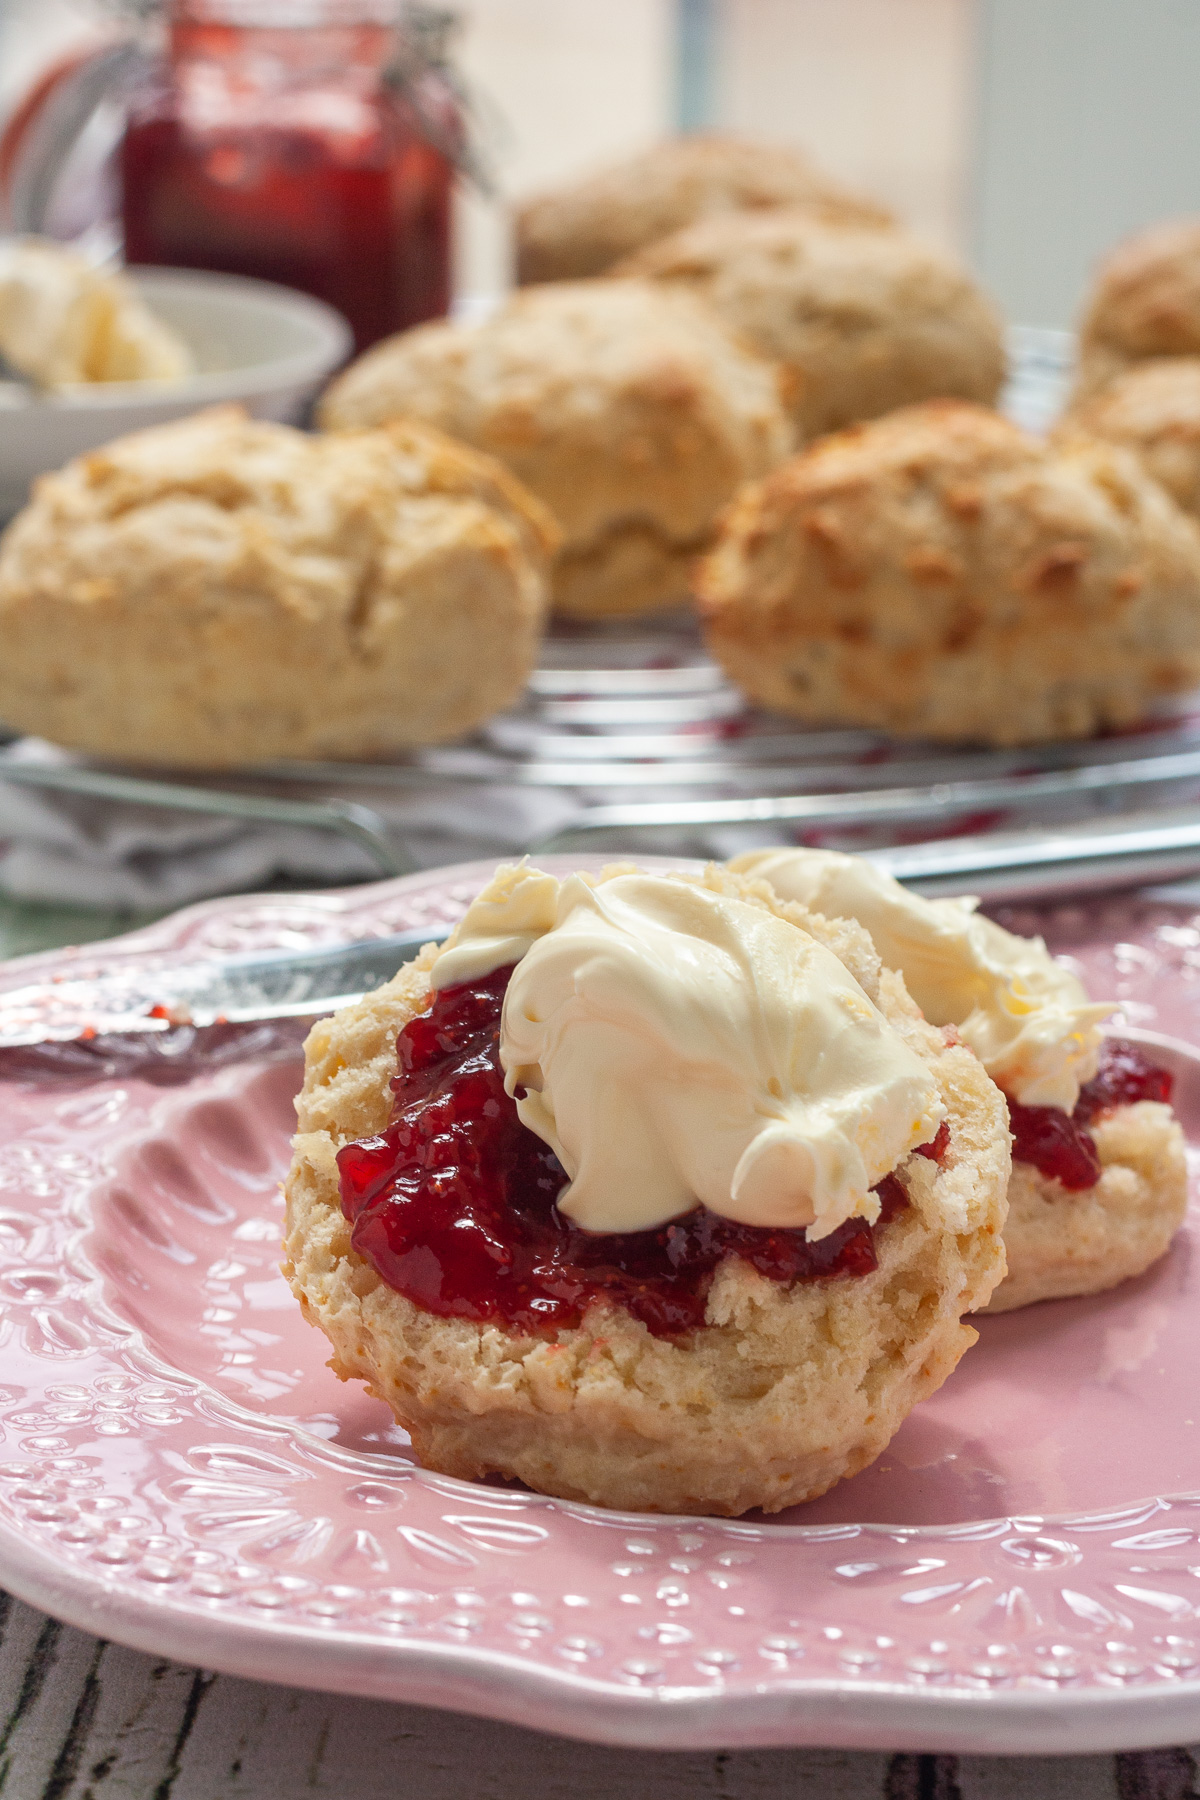 A closeup of a lemonade scone topped with jam and cream on a decorative pink plate with more scones, jam and cream in the background.